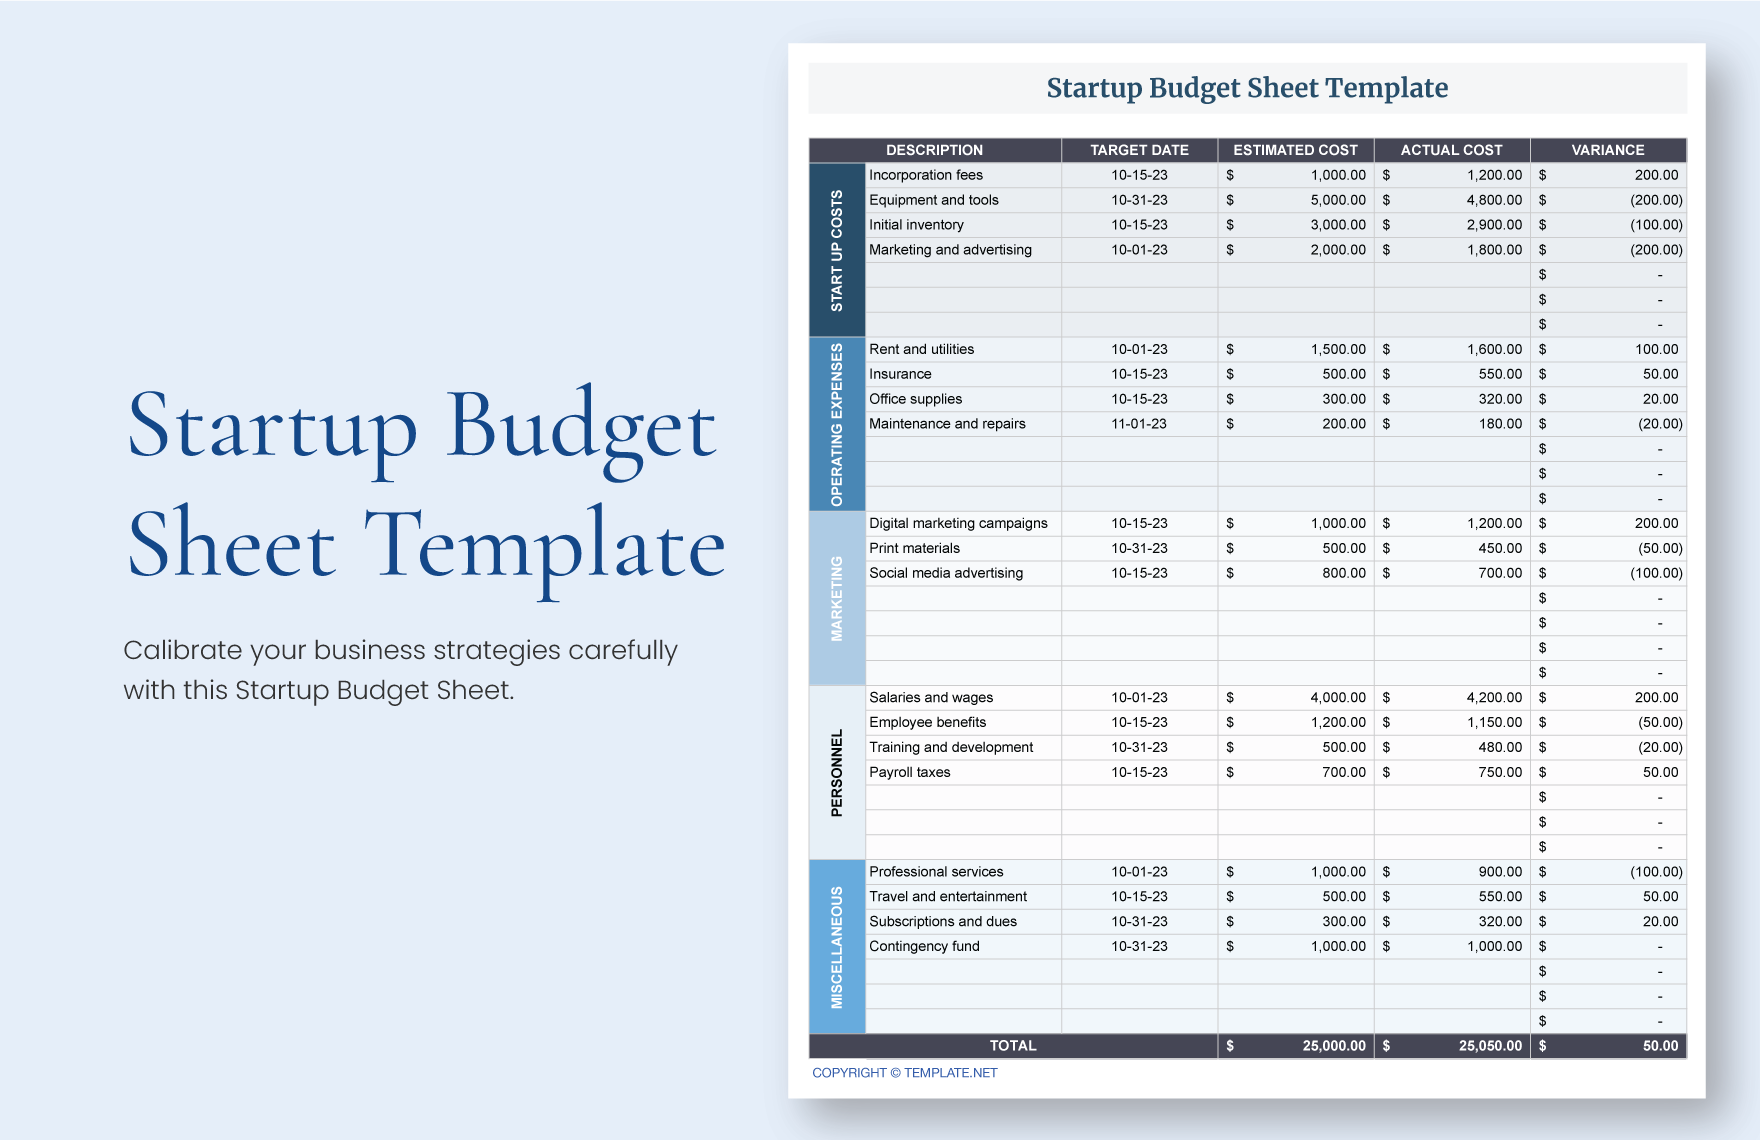 Startup Budget Sheet Template in Word, Google Docs, Excel, Google Sheets